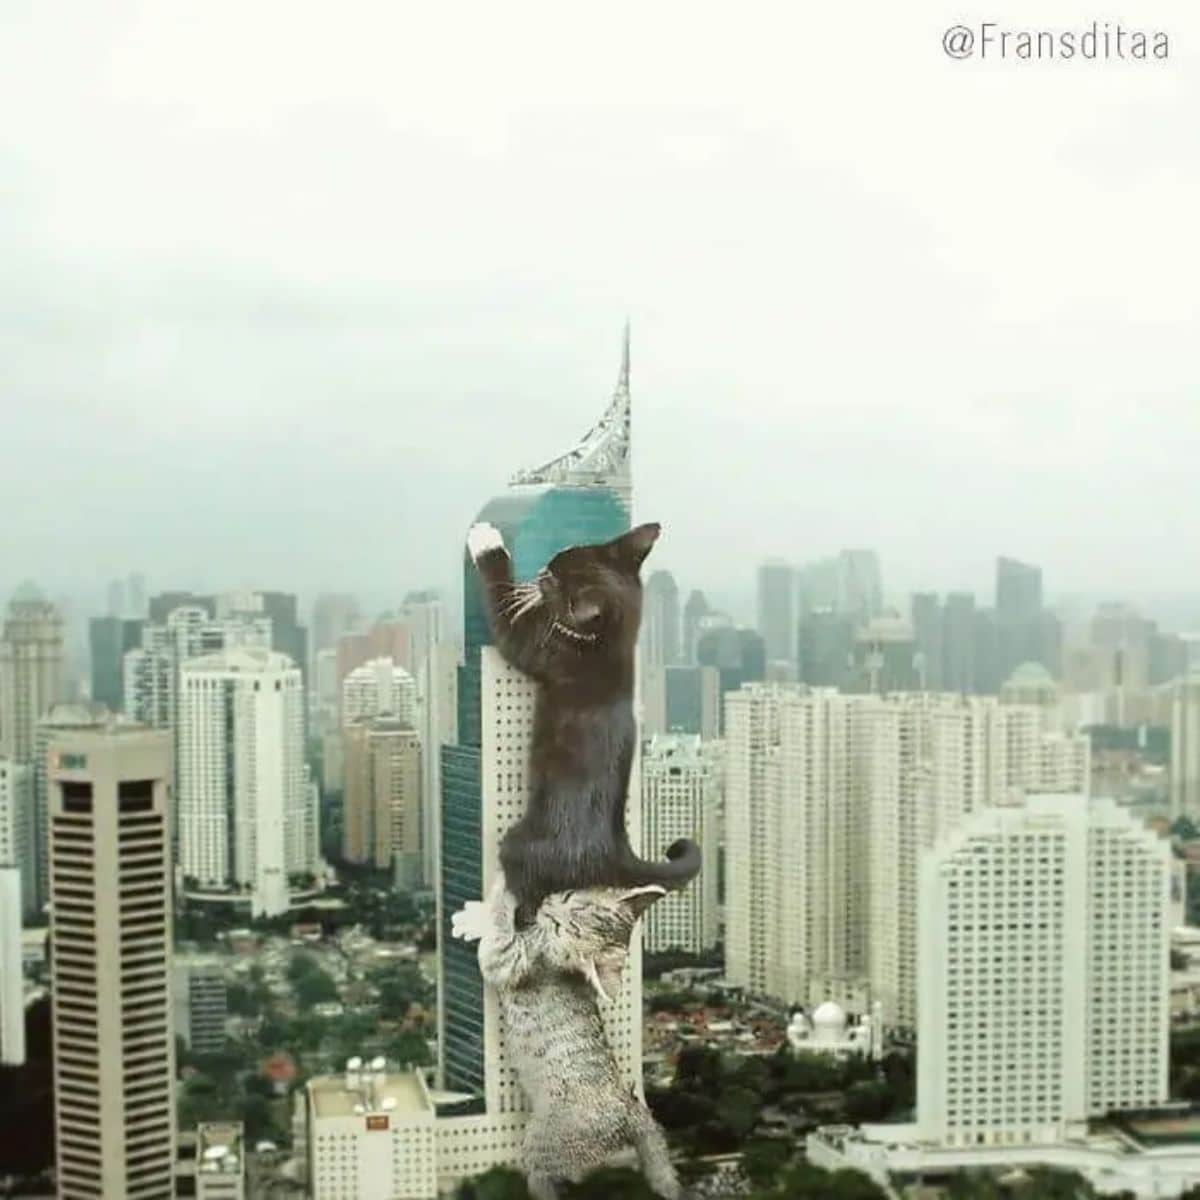 giant photoshopped grey tabby kitten holding up a giant photoshopped black and white kitten holding onto a blue and white skyscraper